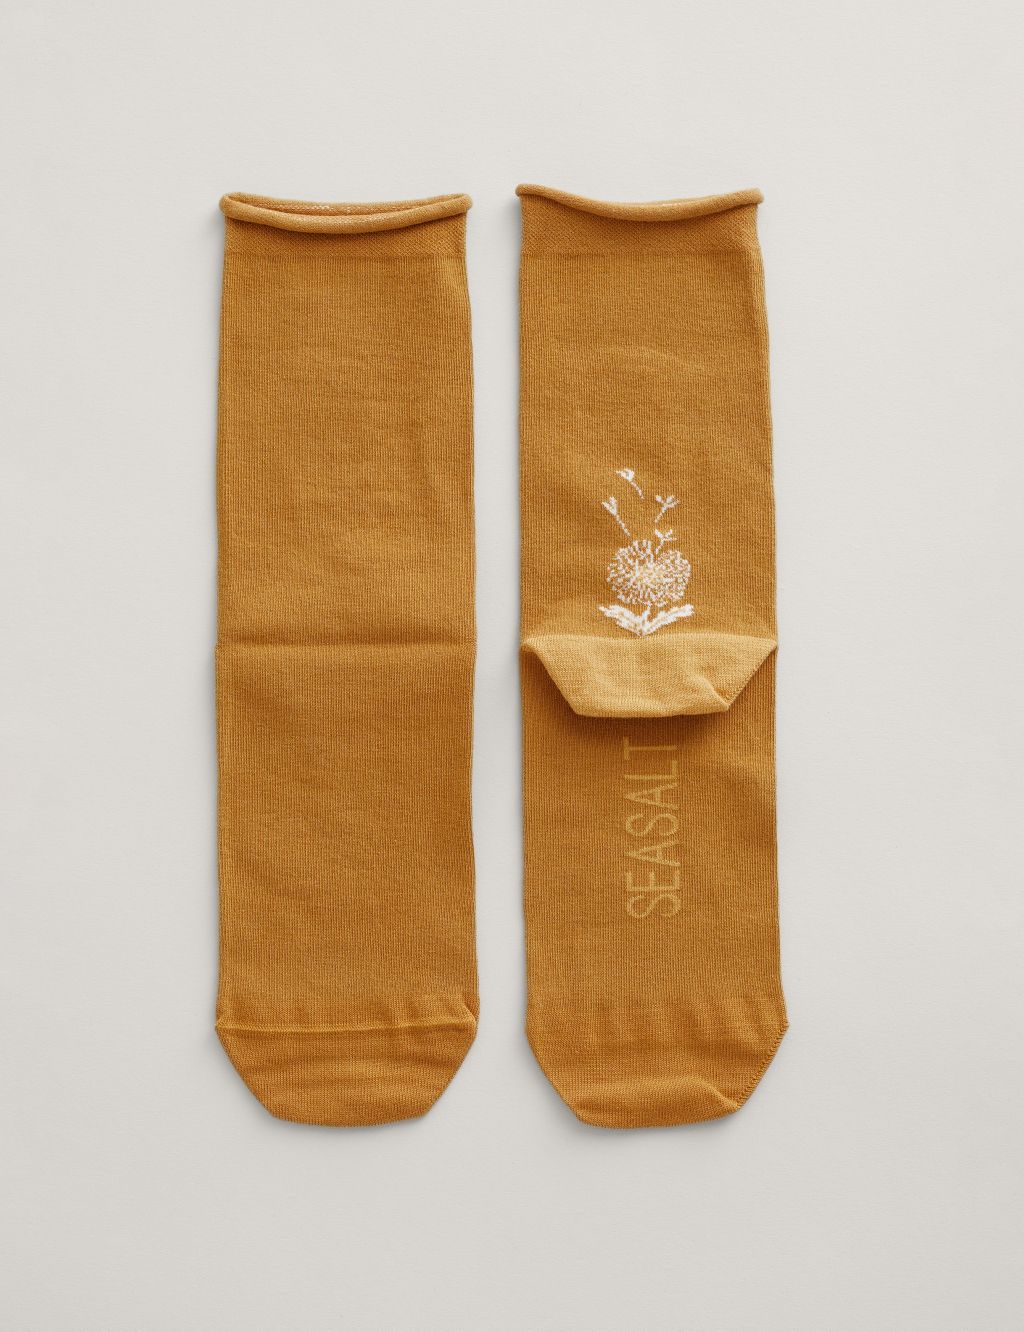 Organic Cotton Patterned Ankle High Socks